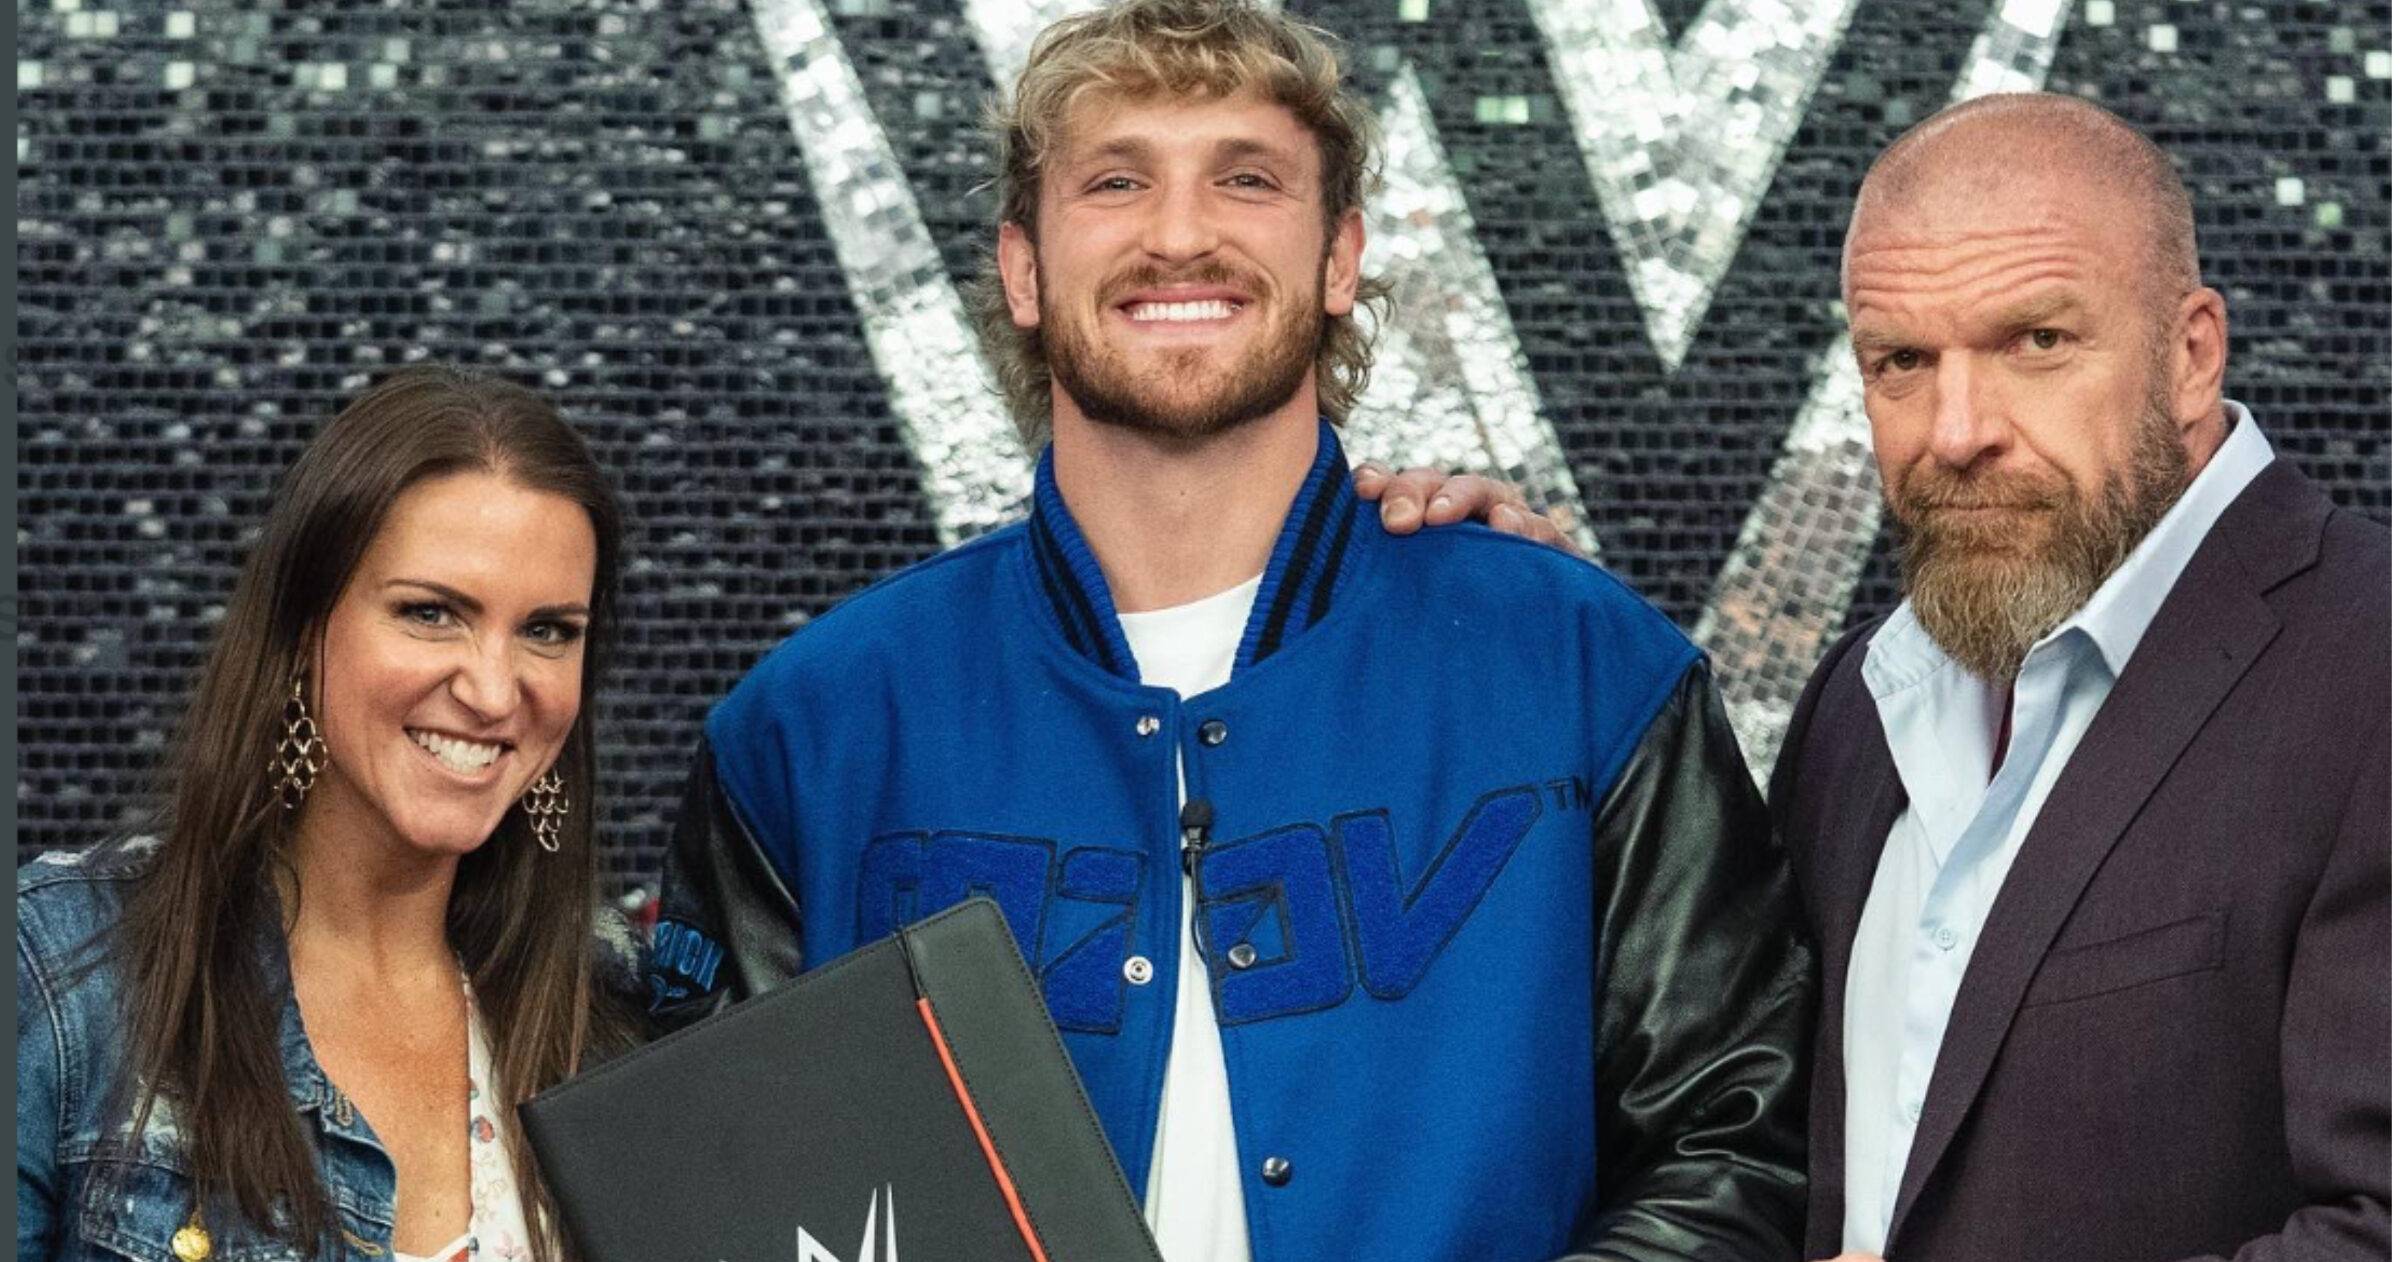 Logan Paul has officially signed with WWE